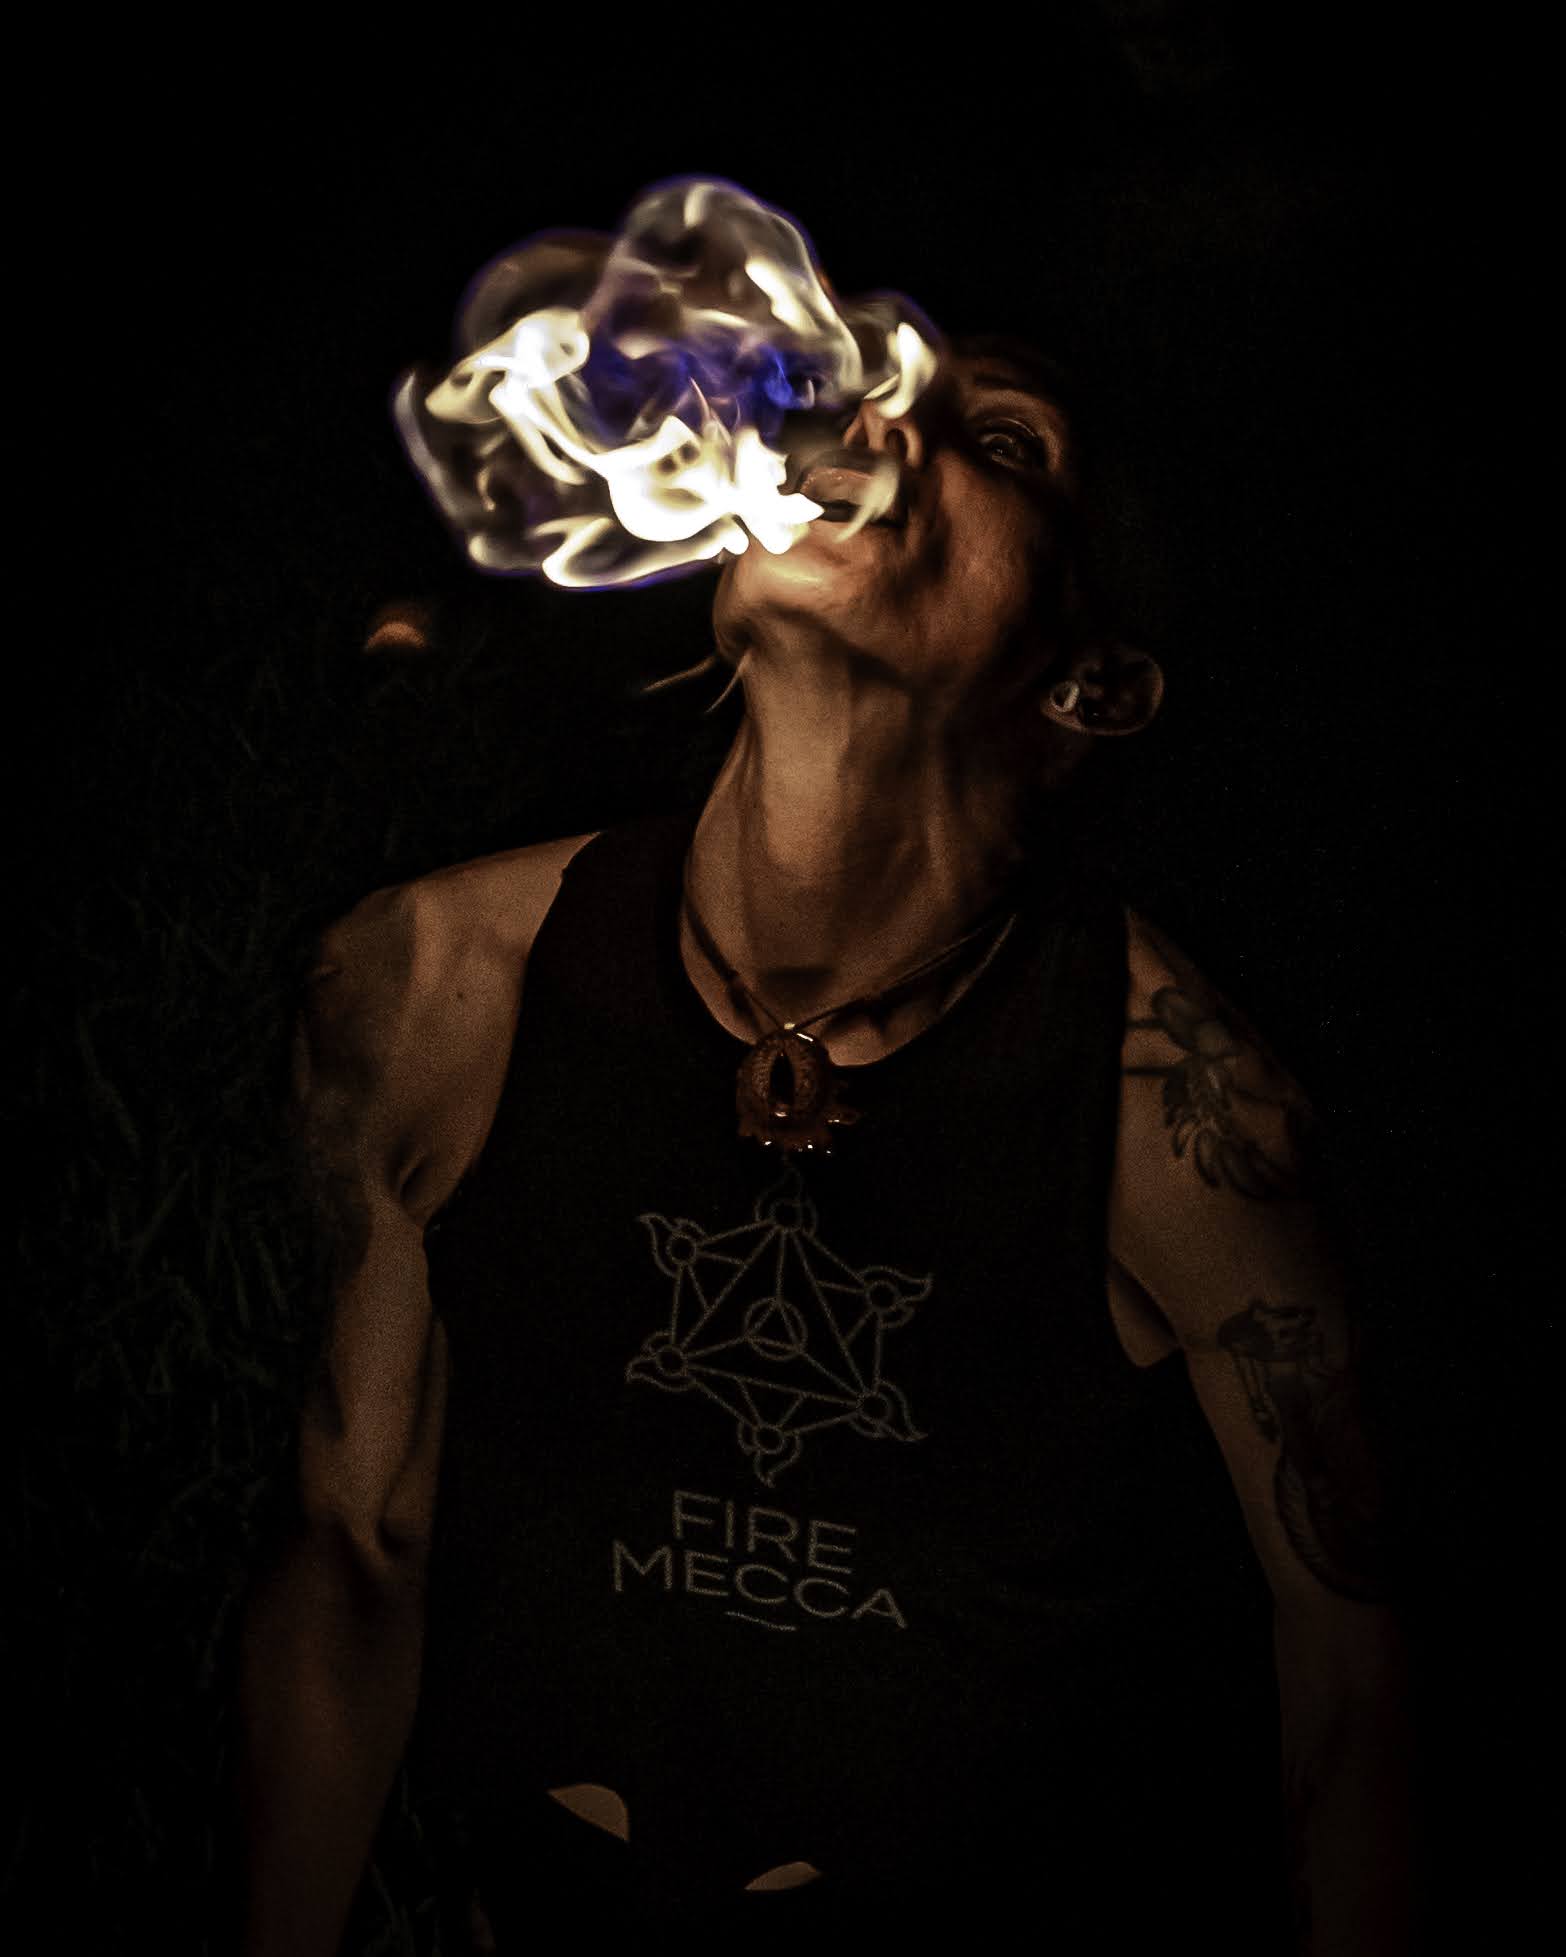 Fire_Eating_Torch_2_Inch_Woven_Kevlar_MoonBlaze_Head_17_Inches_Long_SINGLE_Fire_Breathing_Spitting_Blower_Circus_Flow_Dance_Prop_For_Festivals_Performances_By_FIRE_MECCA